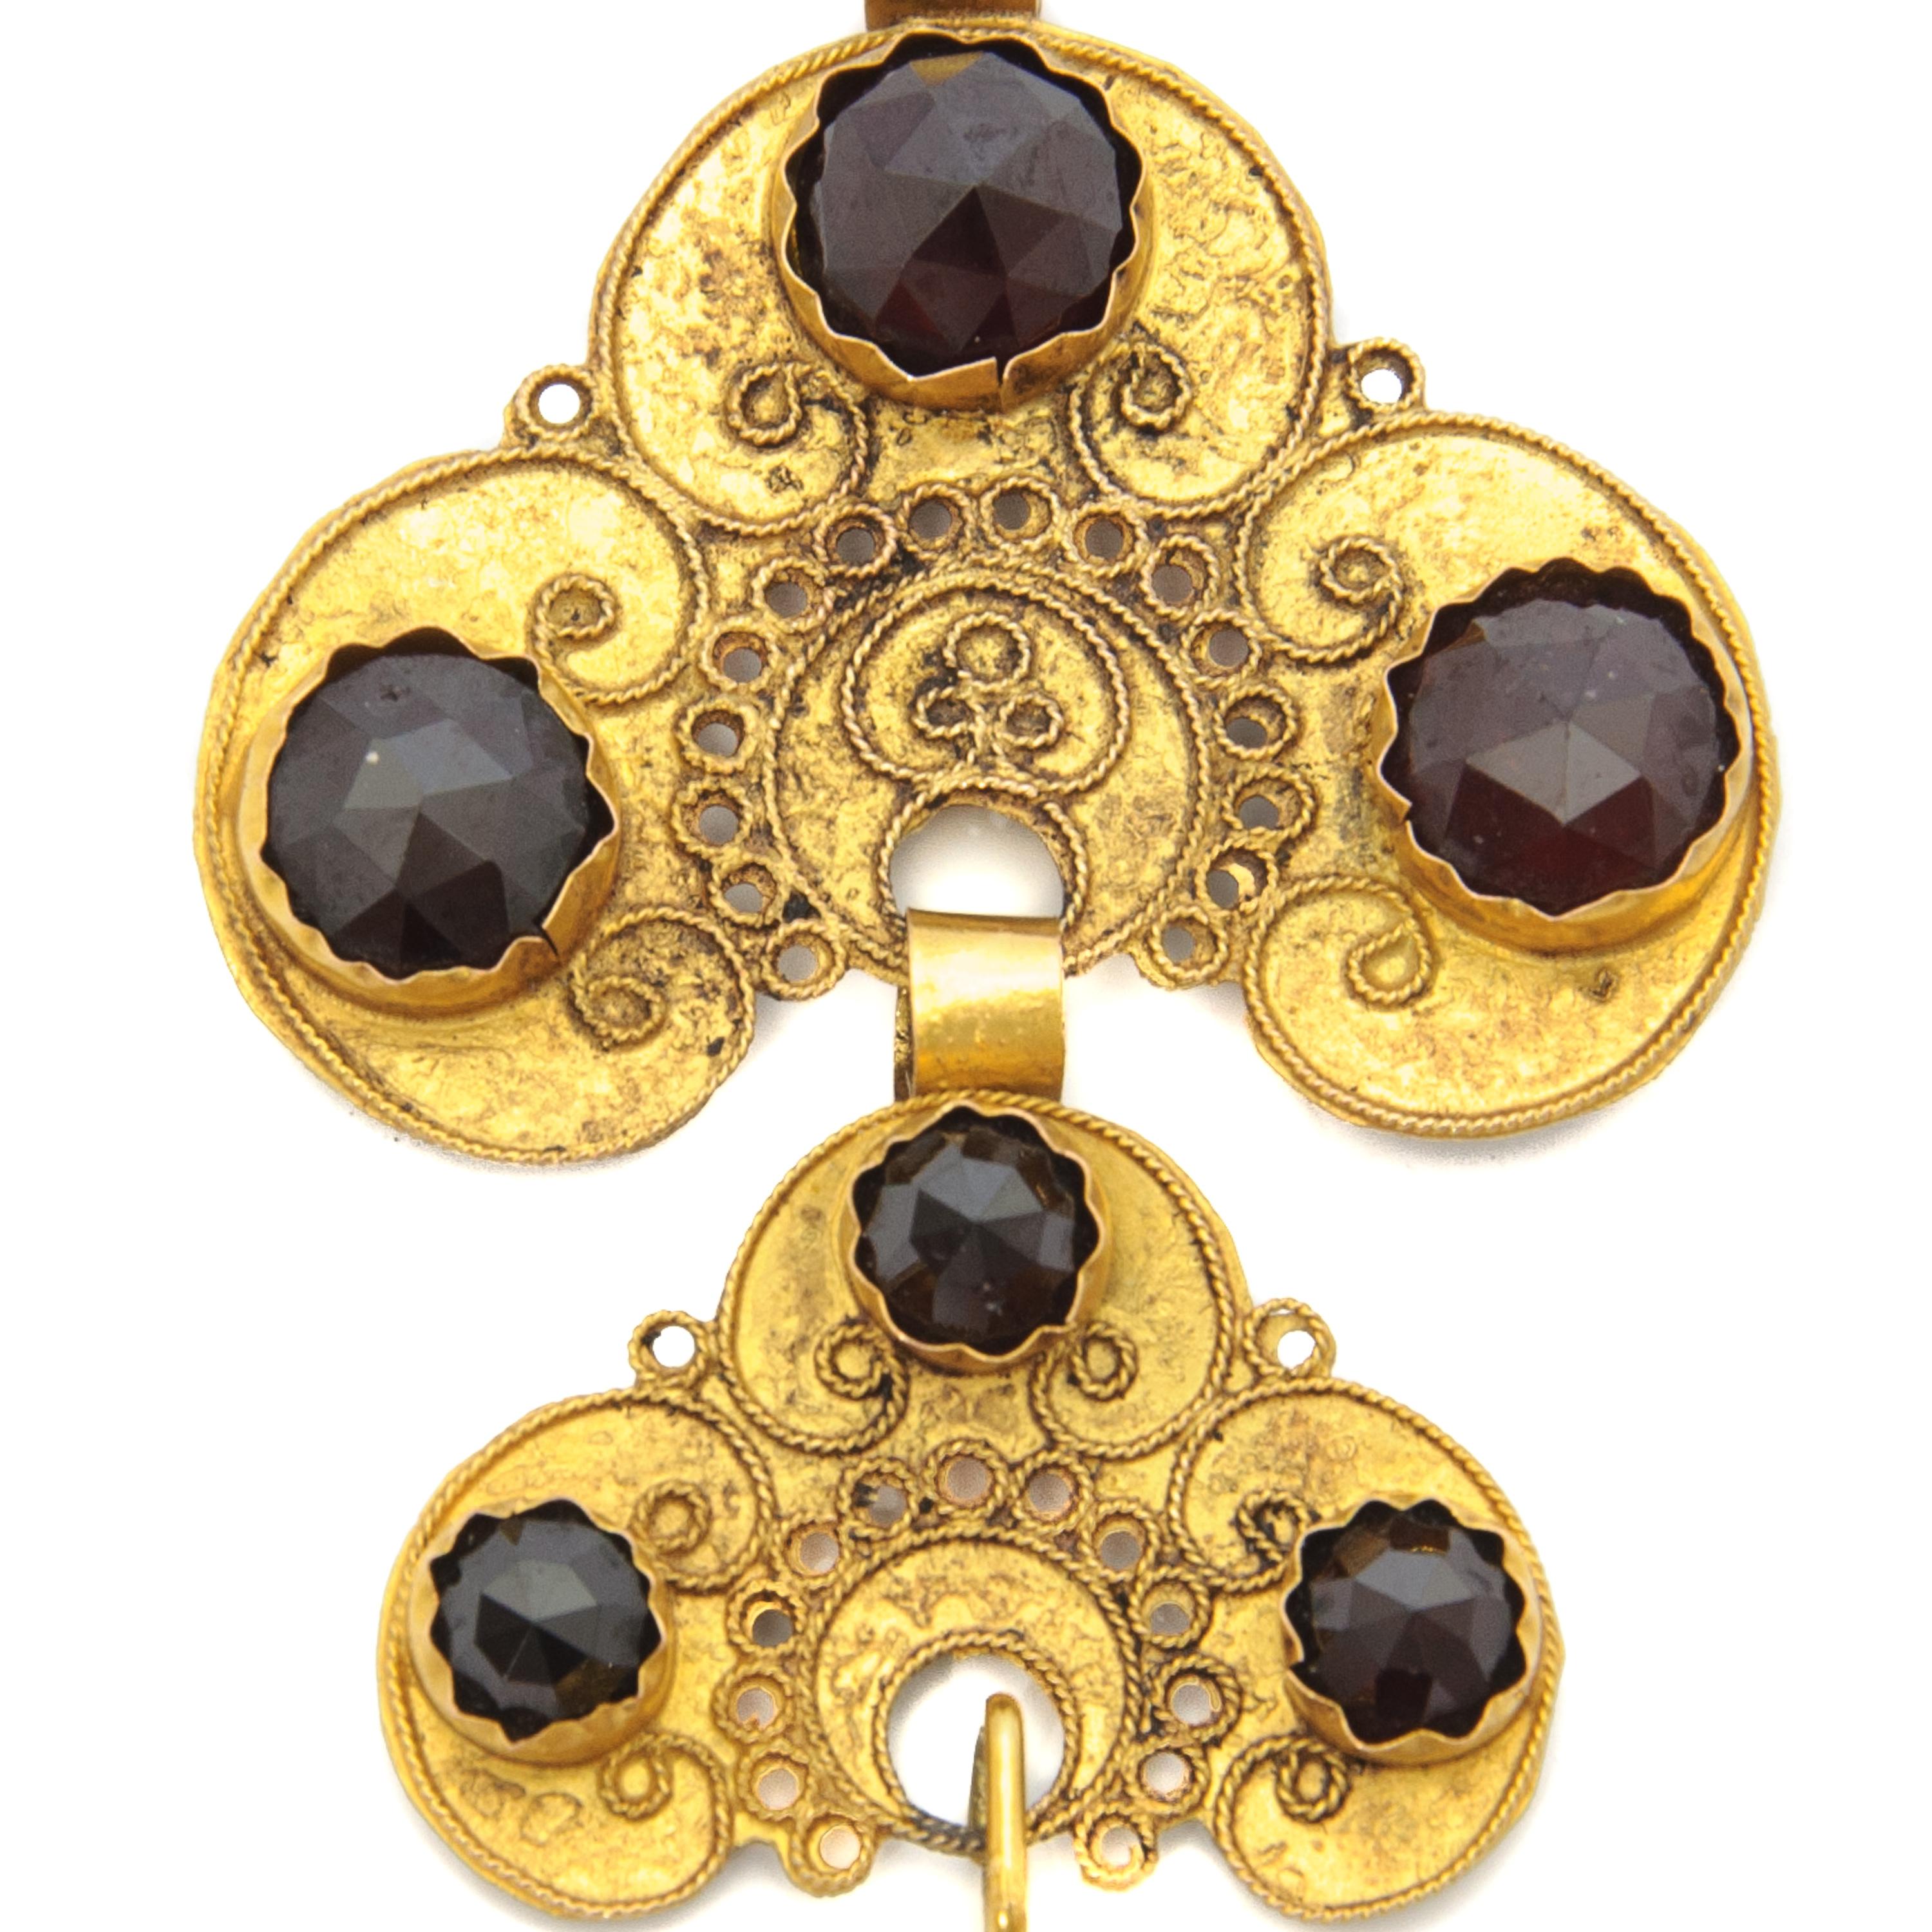 Beautiful 14 karat yellow gold pendant set with seven faceted cut garnet gemstones. The pendant has cloverleaf-shapes. The pendant is open worked and has swirls and curls on both sides. At the front the gold is set with seven beautiful faceted